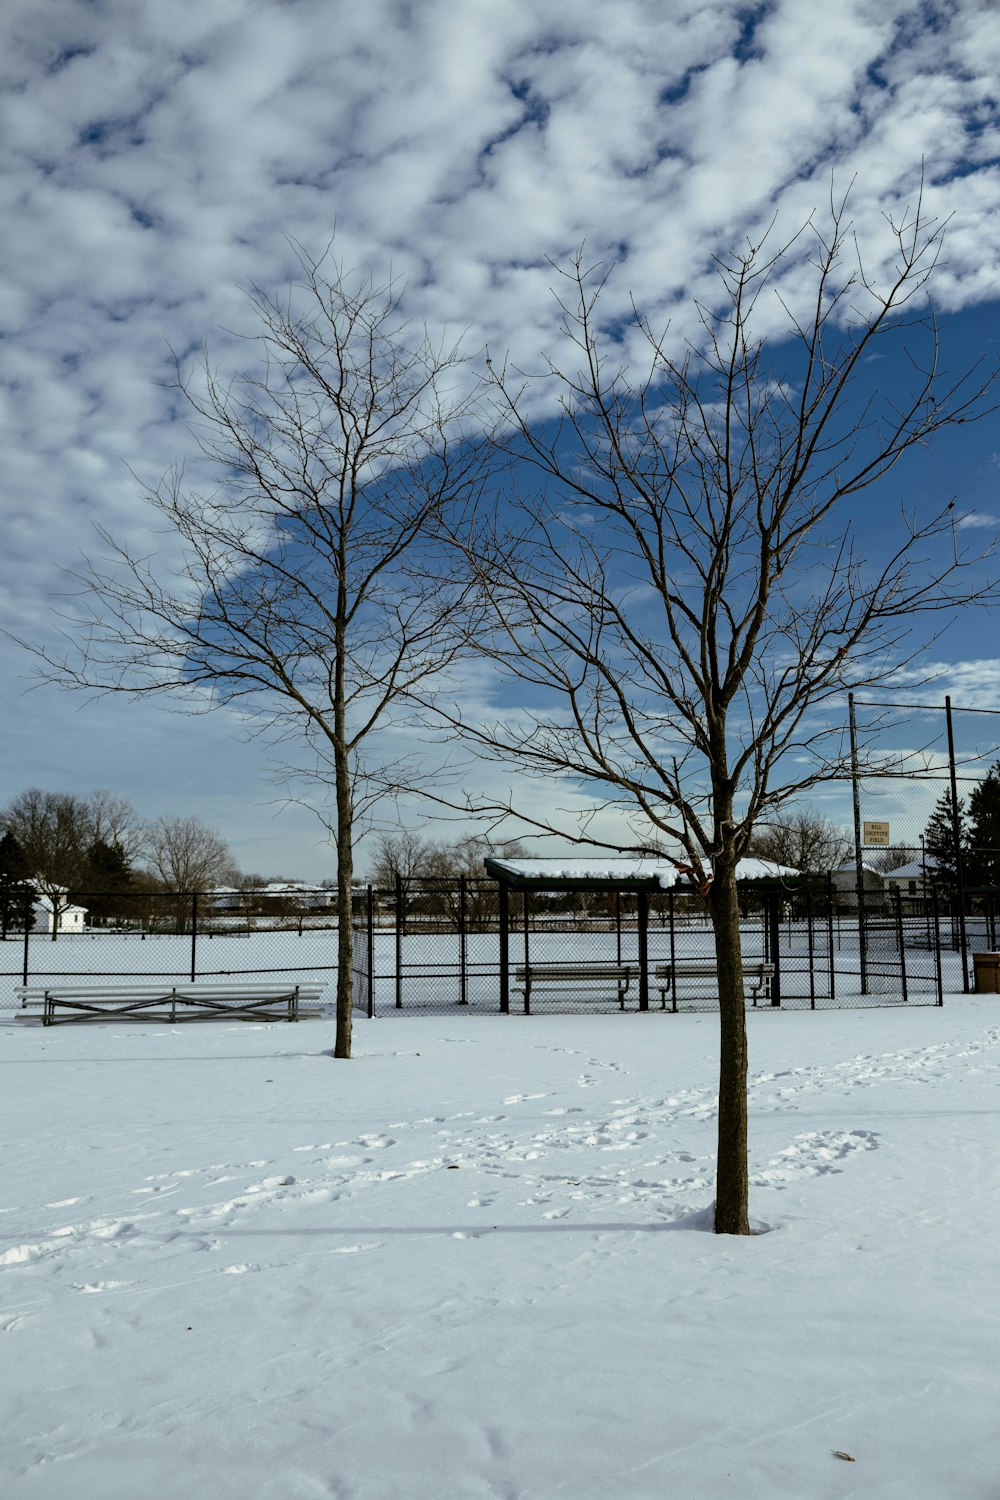 a snow covered field with trees and a fence